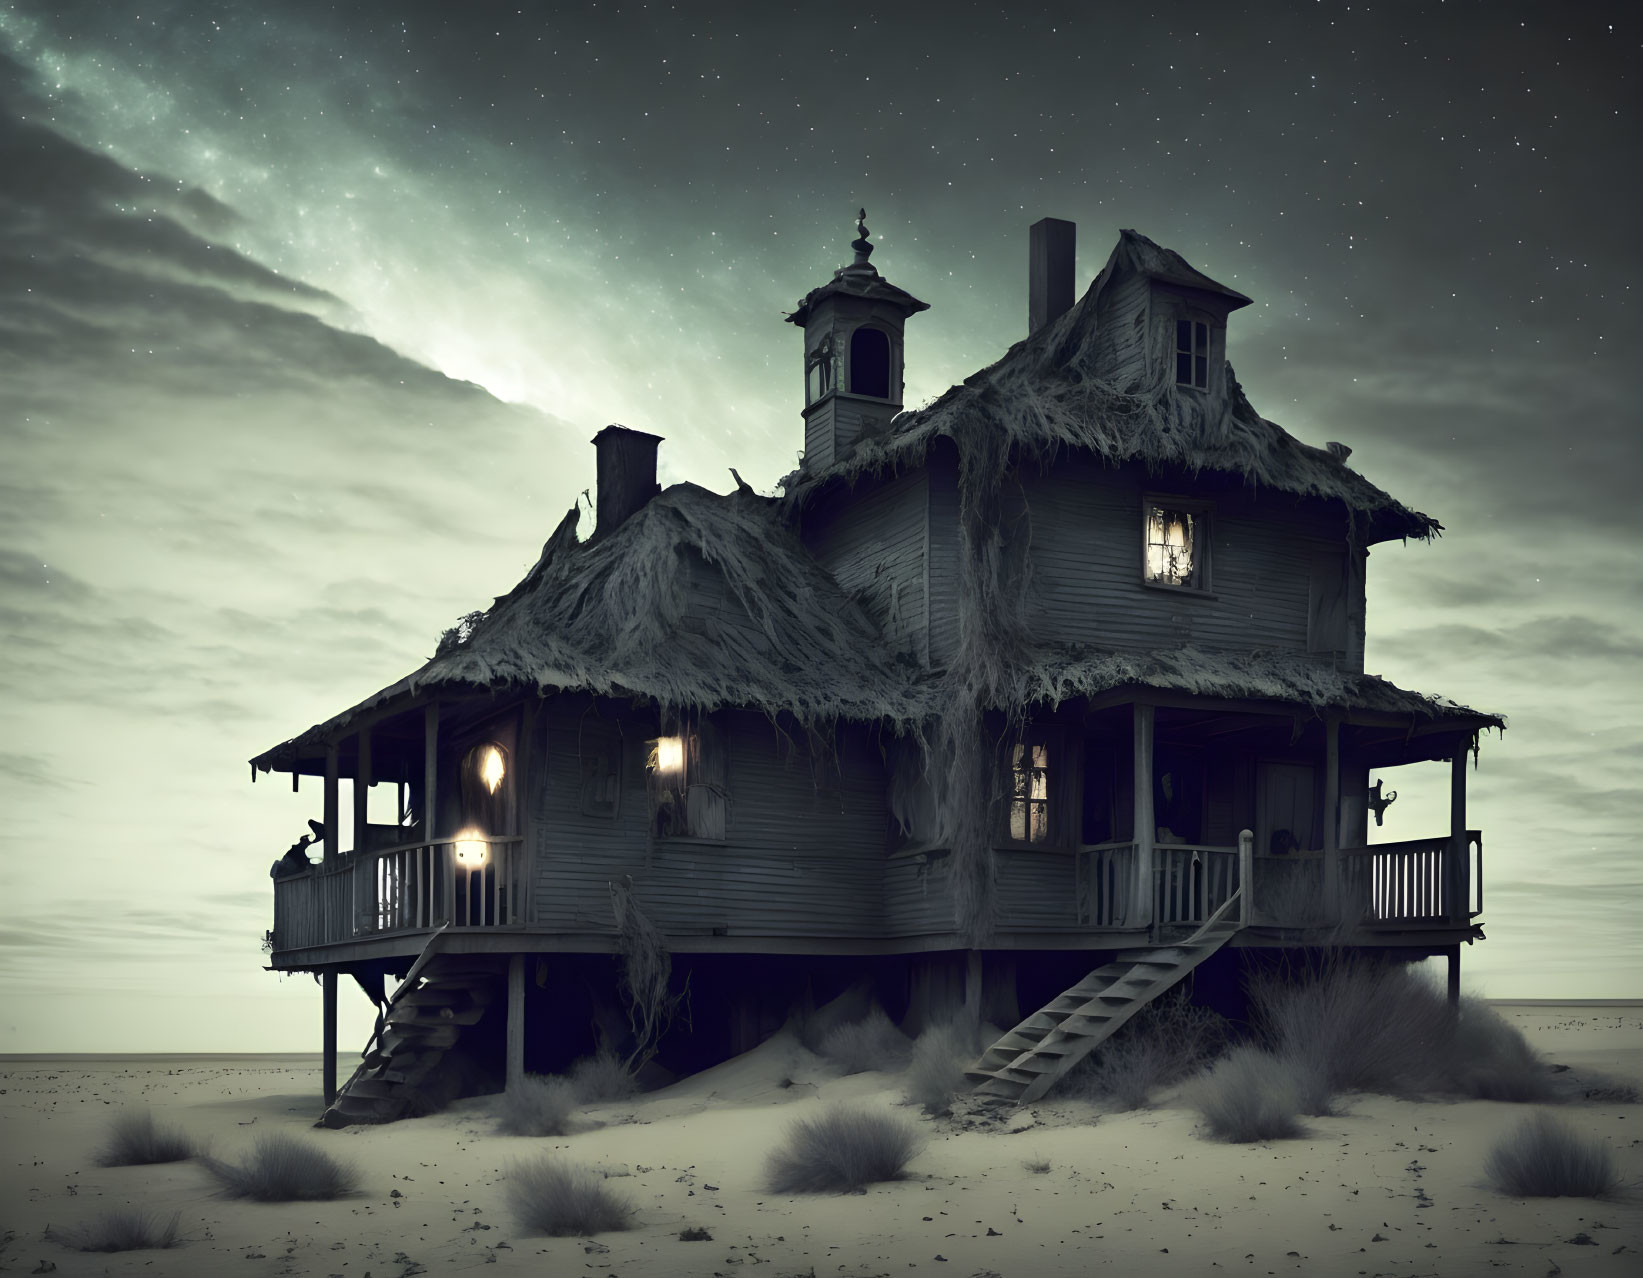 Abandoned two-story house at night in desert landscape